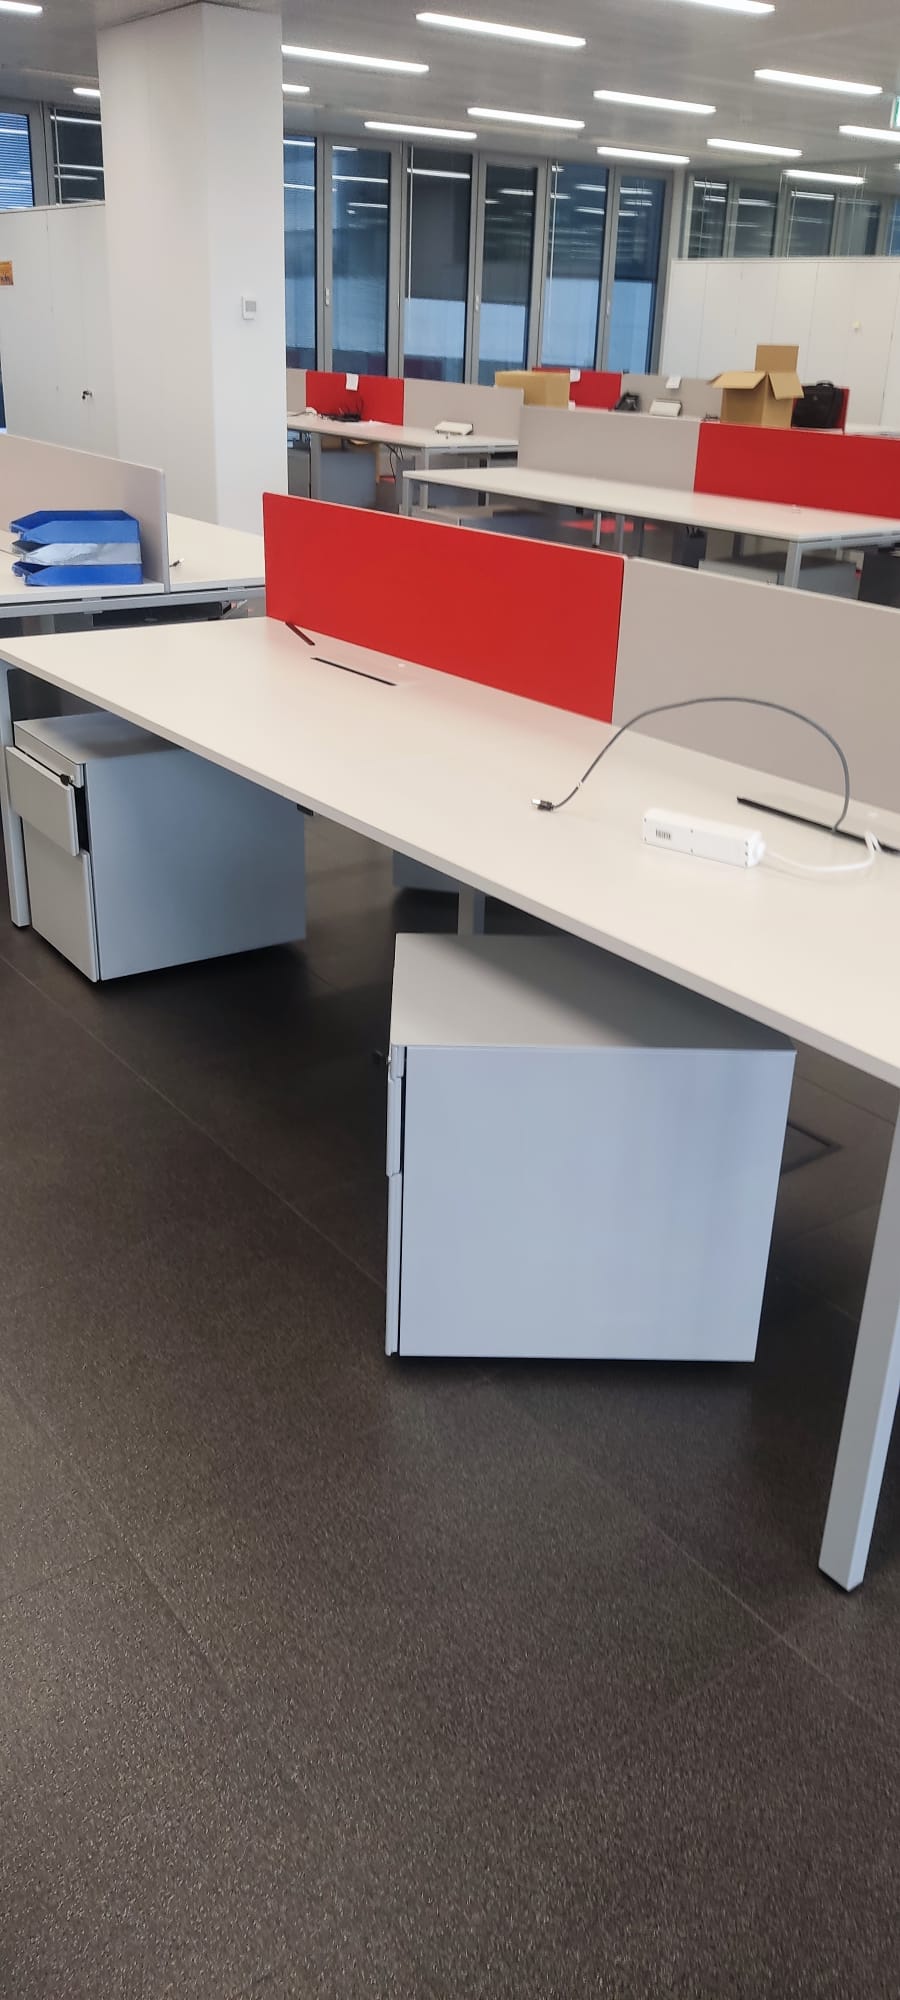 46577 - Office Desks and Drawers stock Europe